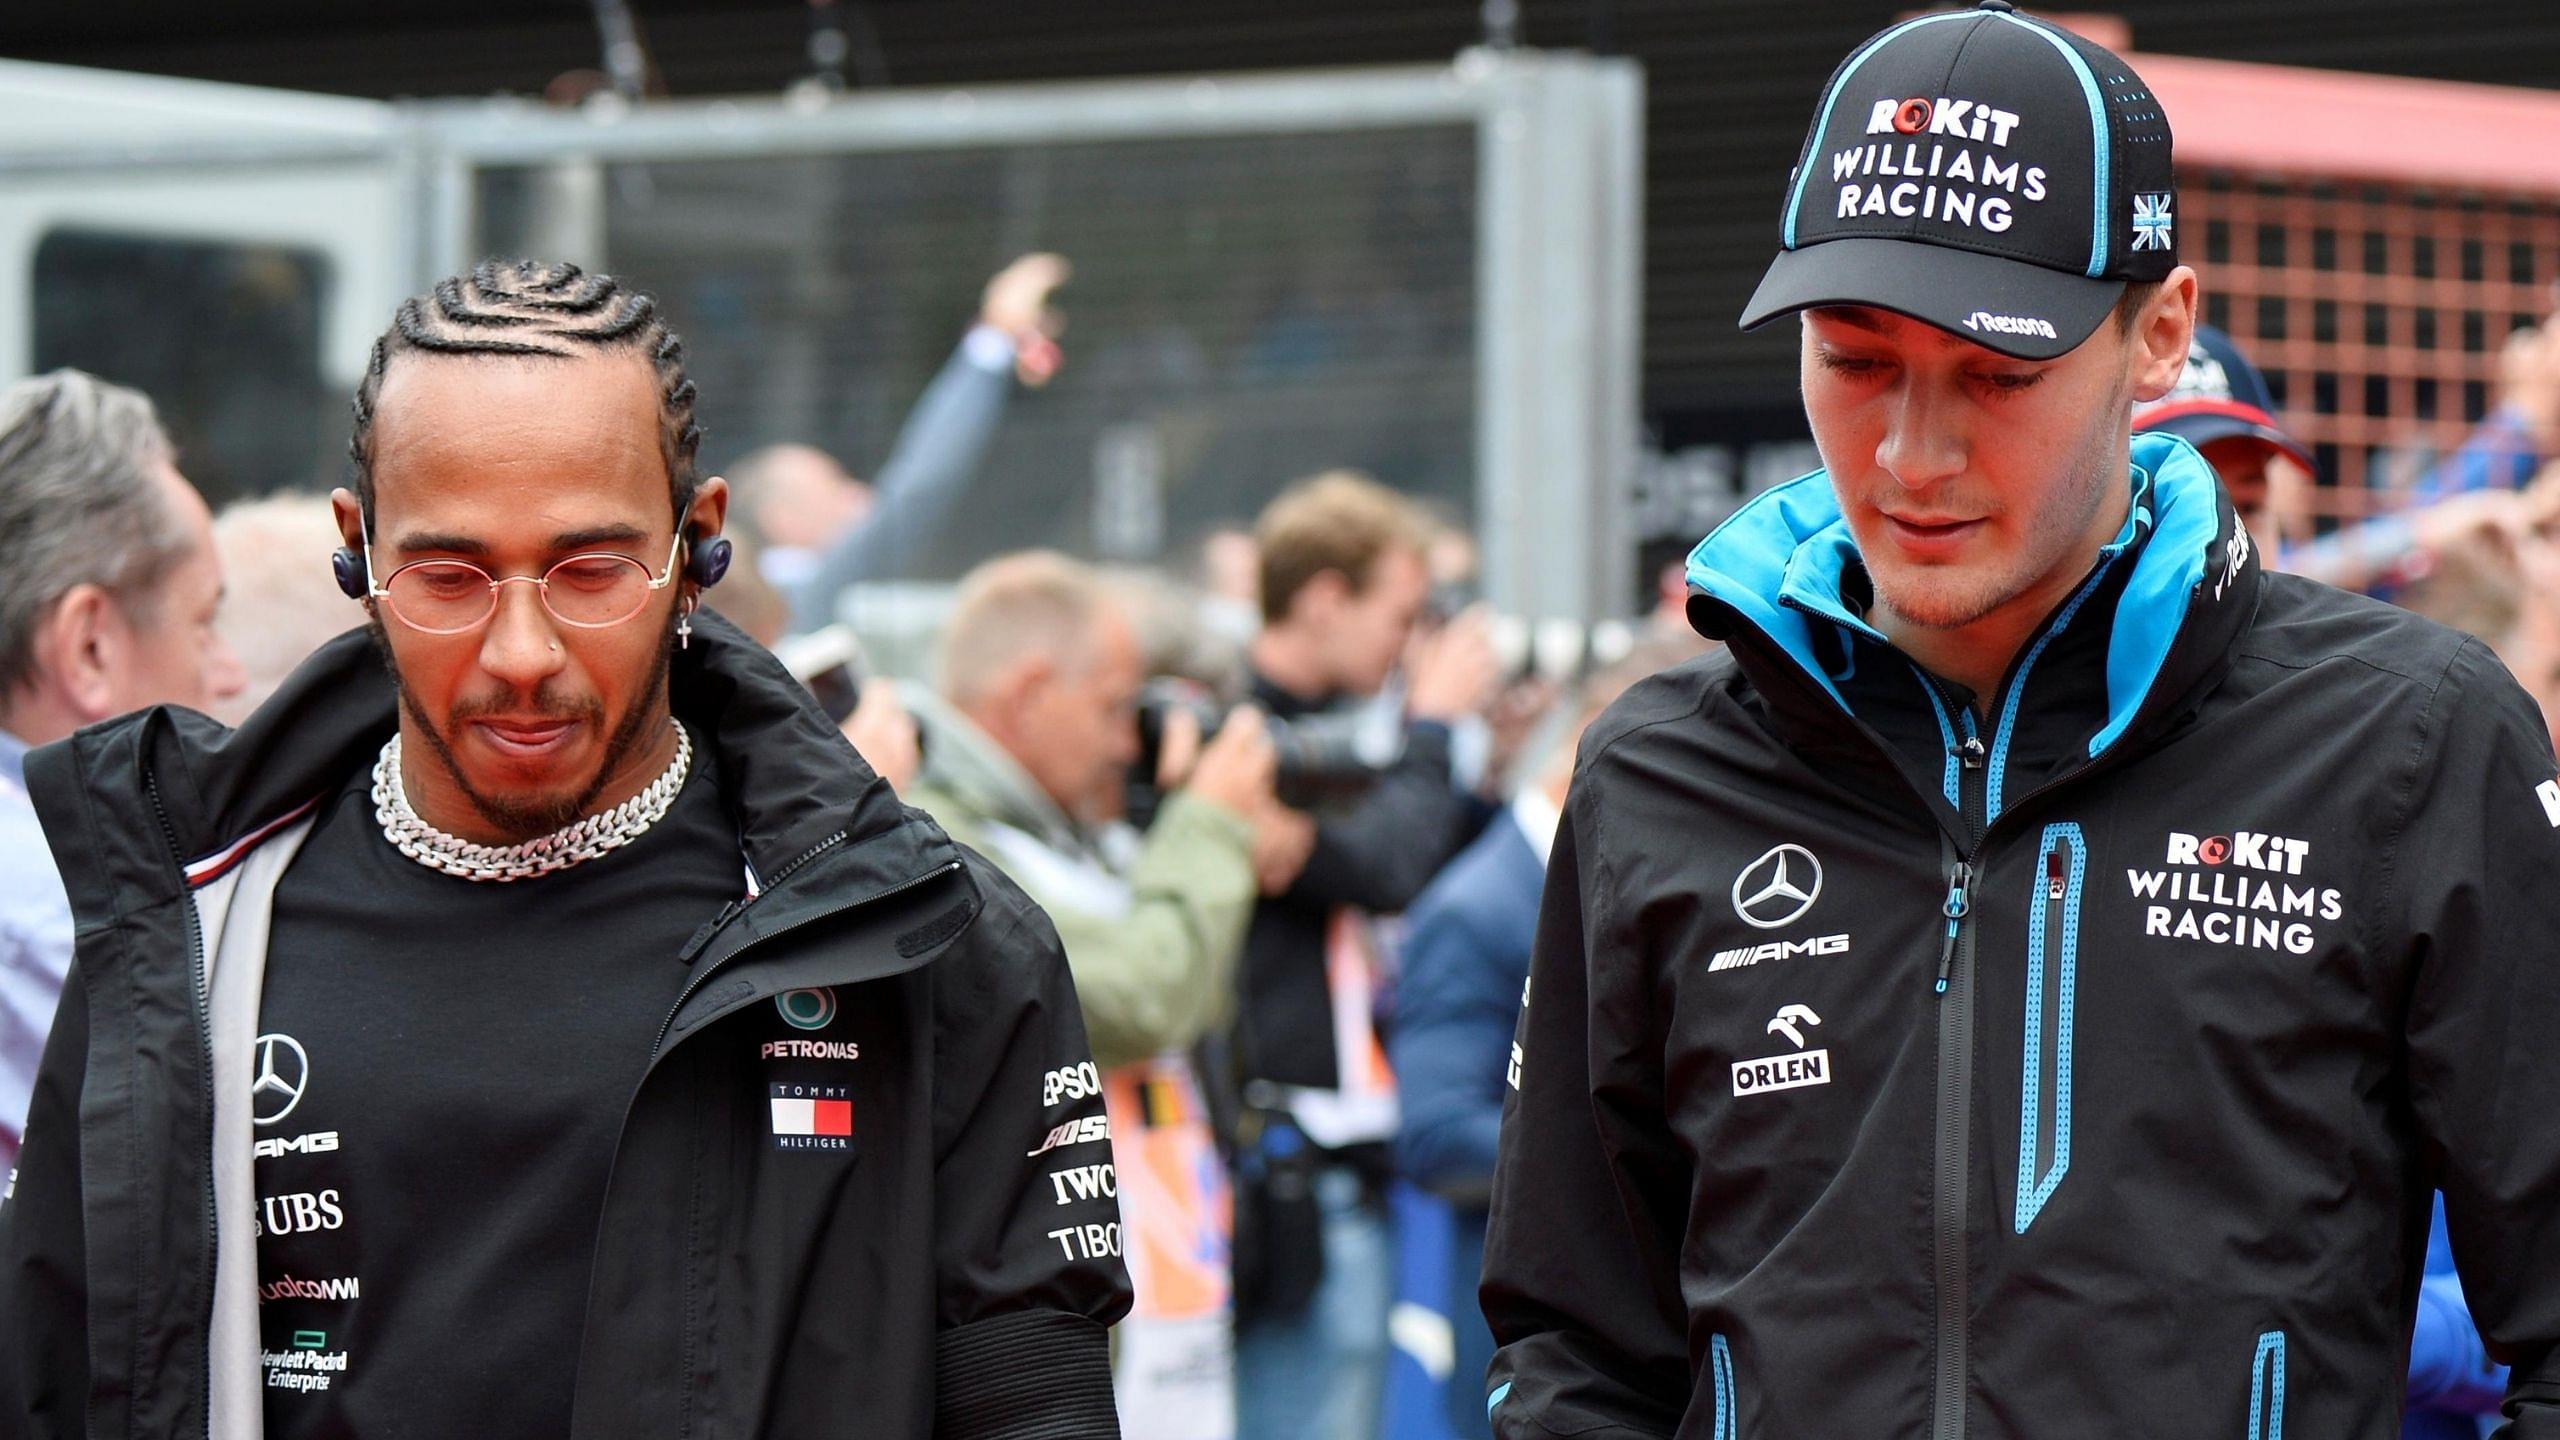 “It is very strange that it has taken so long” - Former F1 driver reveals why George Russell was not considered over Lewis Hamilton by Mercedes